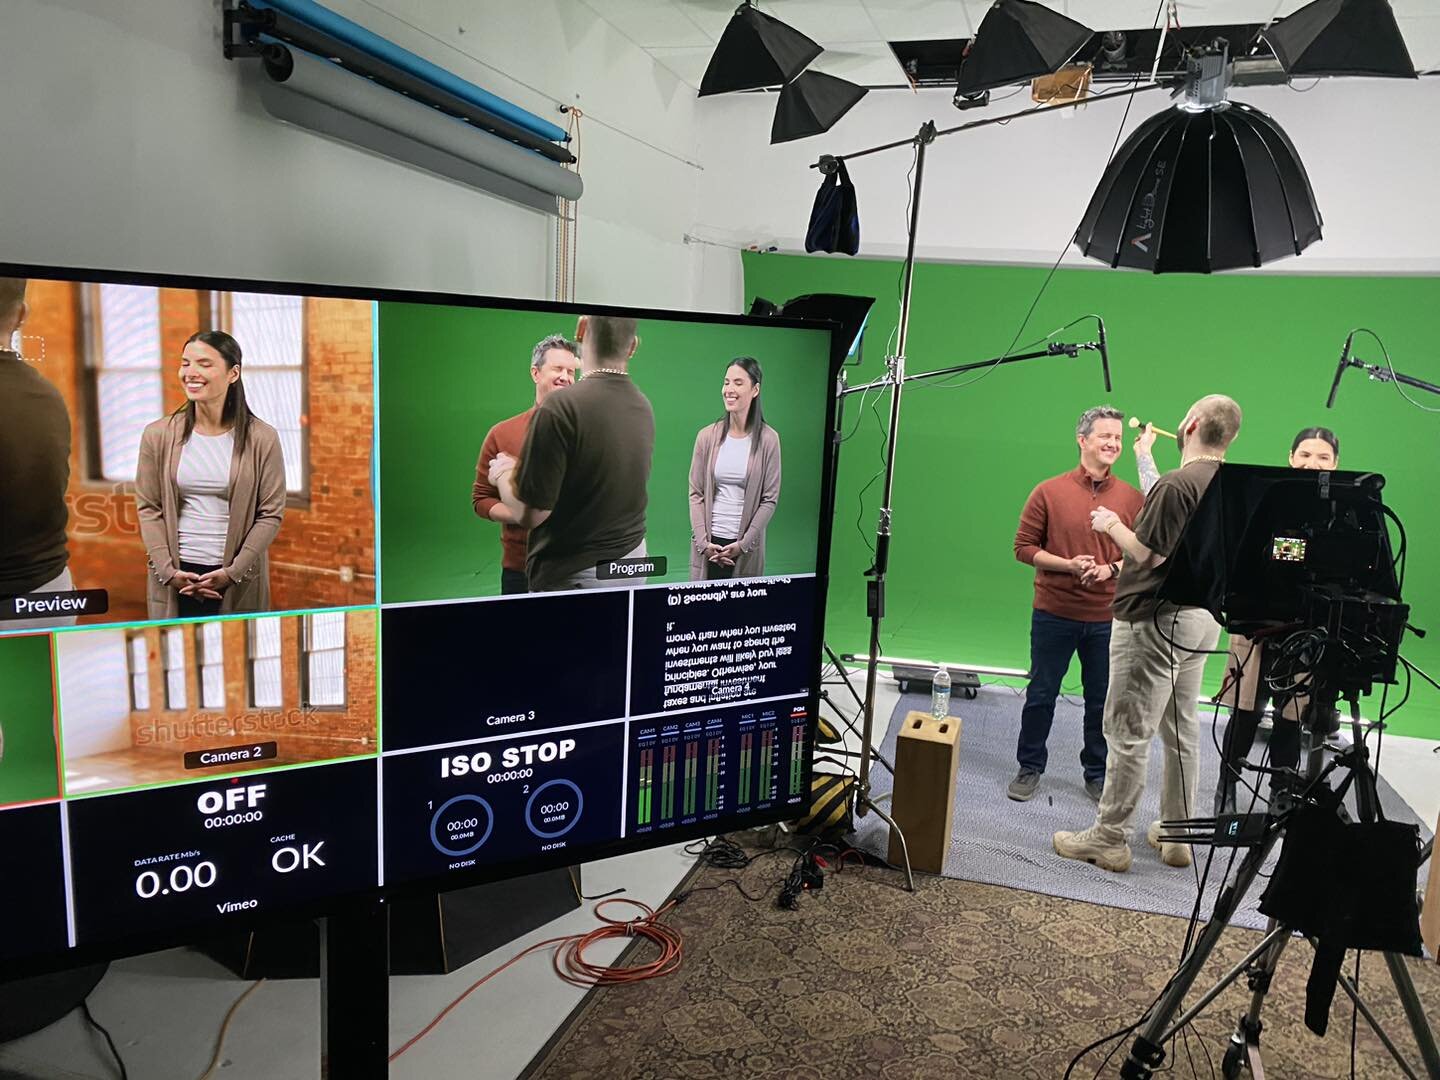 Filming some green screen production this week. So much goes into these shoots however we live to have fun!  #greenscreenvideo #videoproduction #fortcollinssmallbusiness #smallbusinessowner